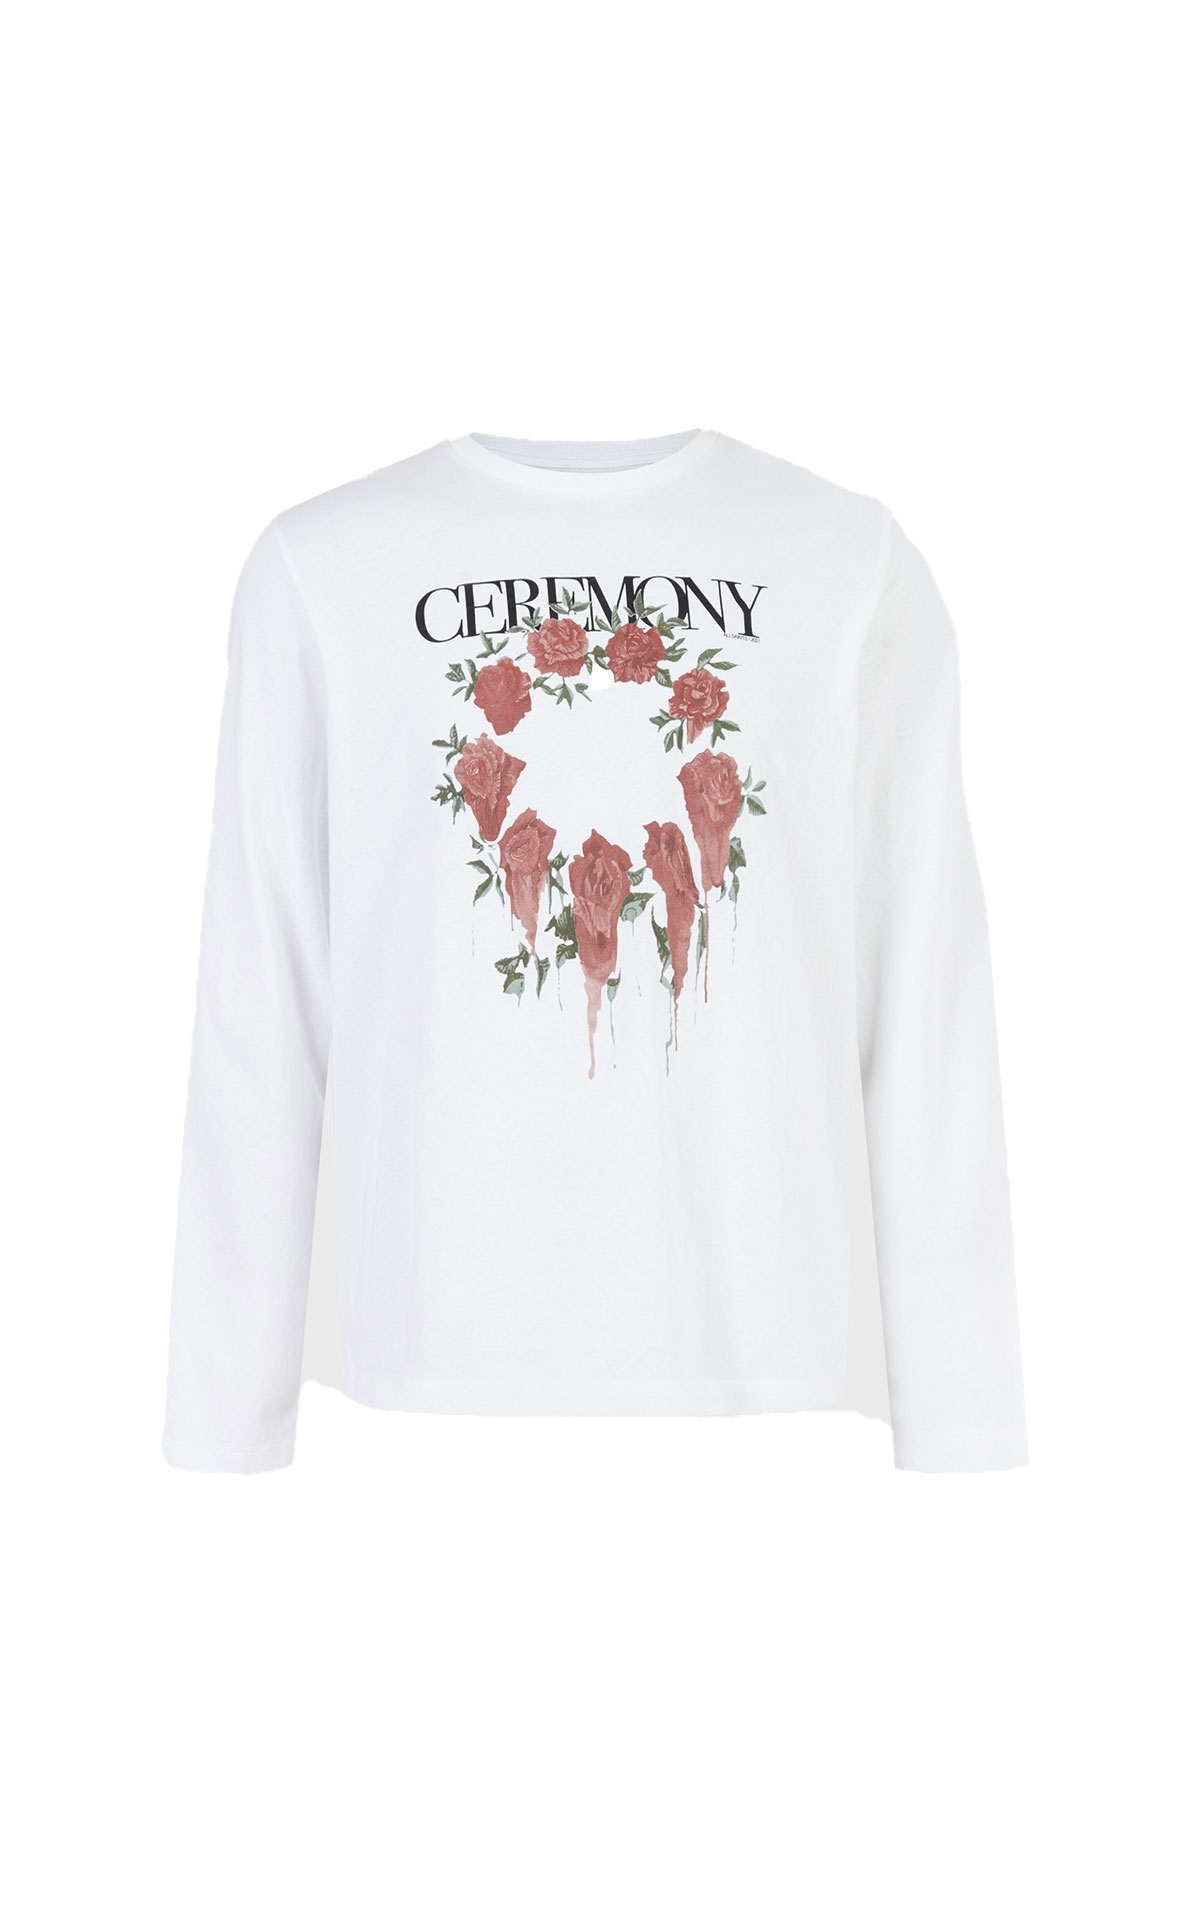 AllSaints Ceremony l/s crewneck tee from Bicester Village